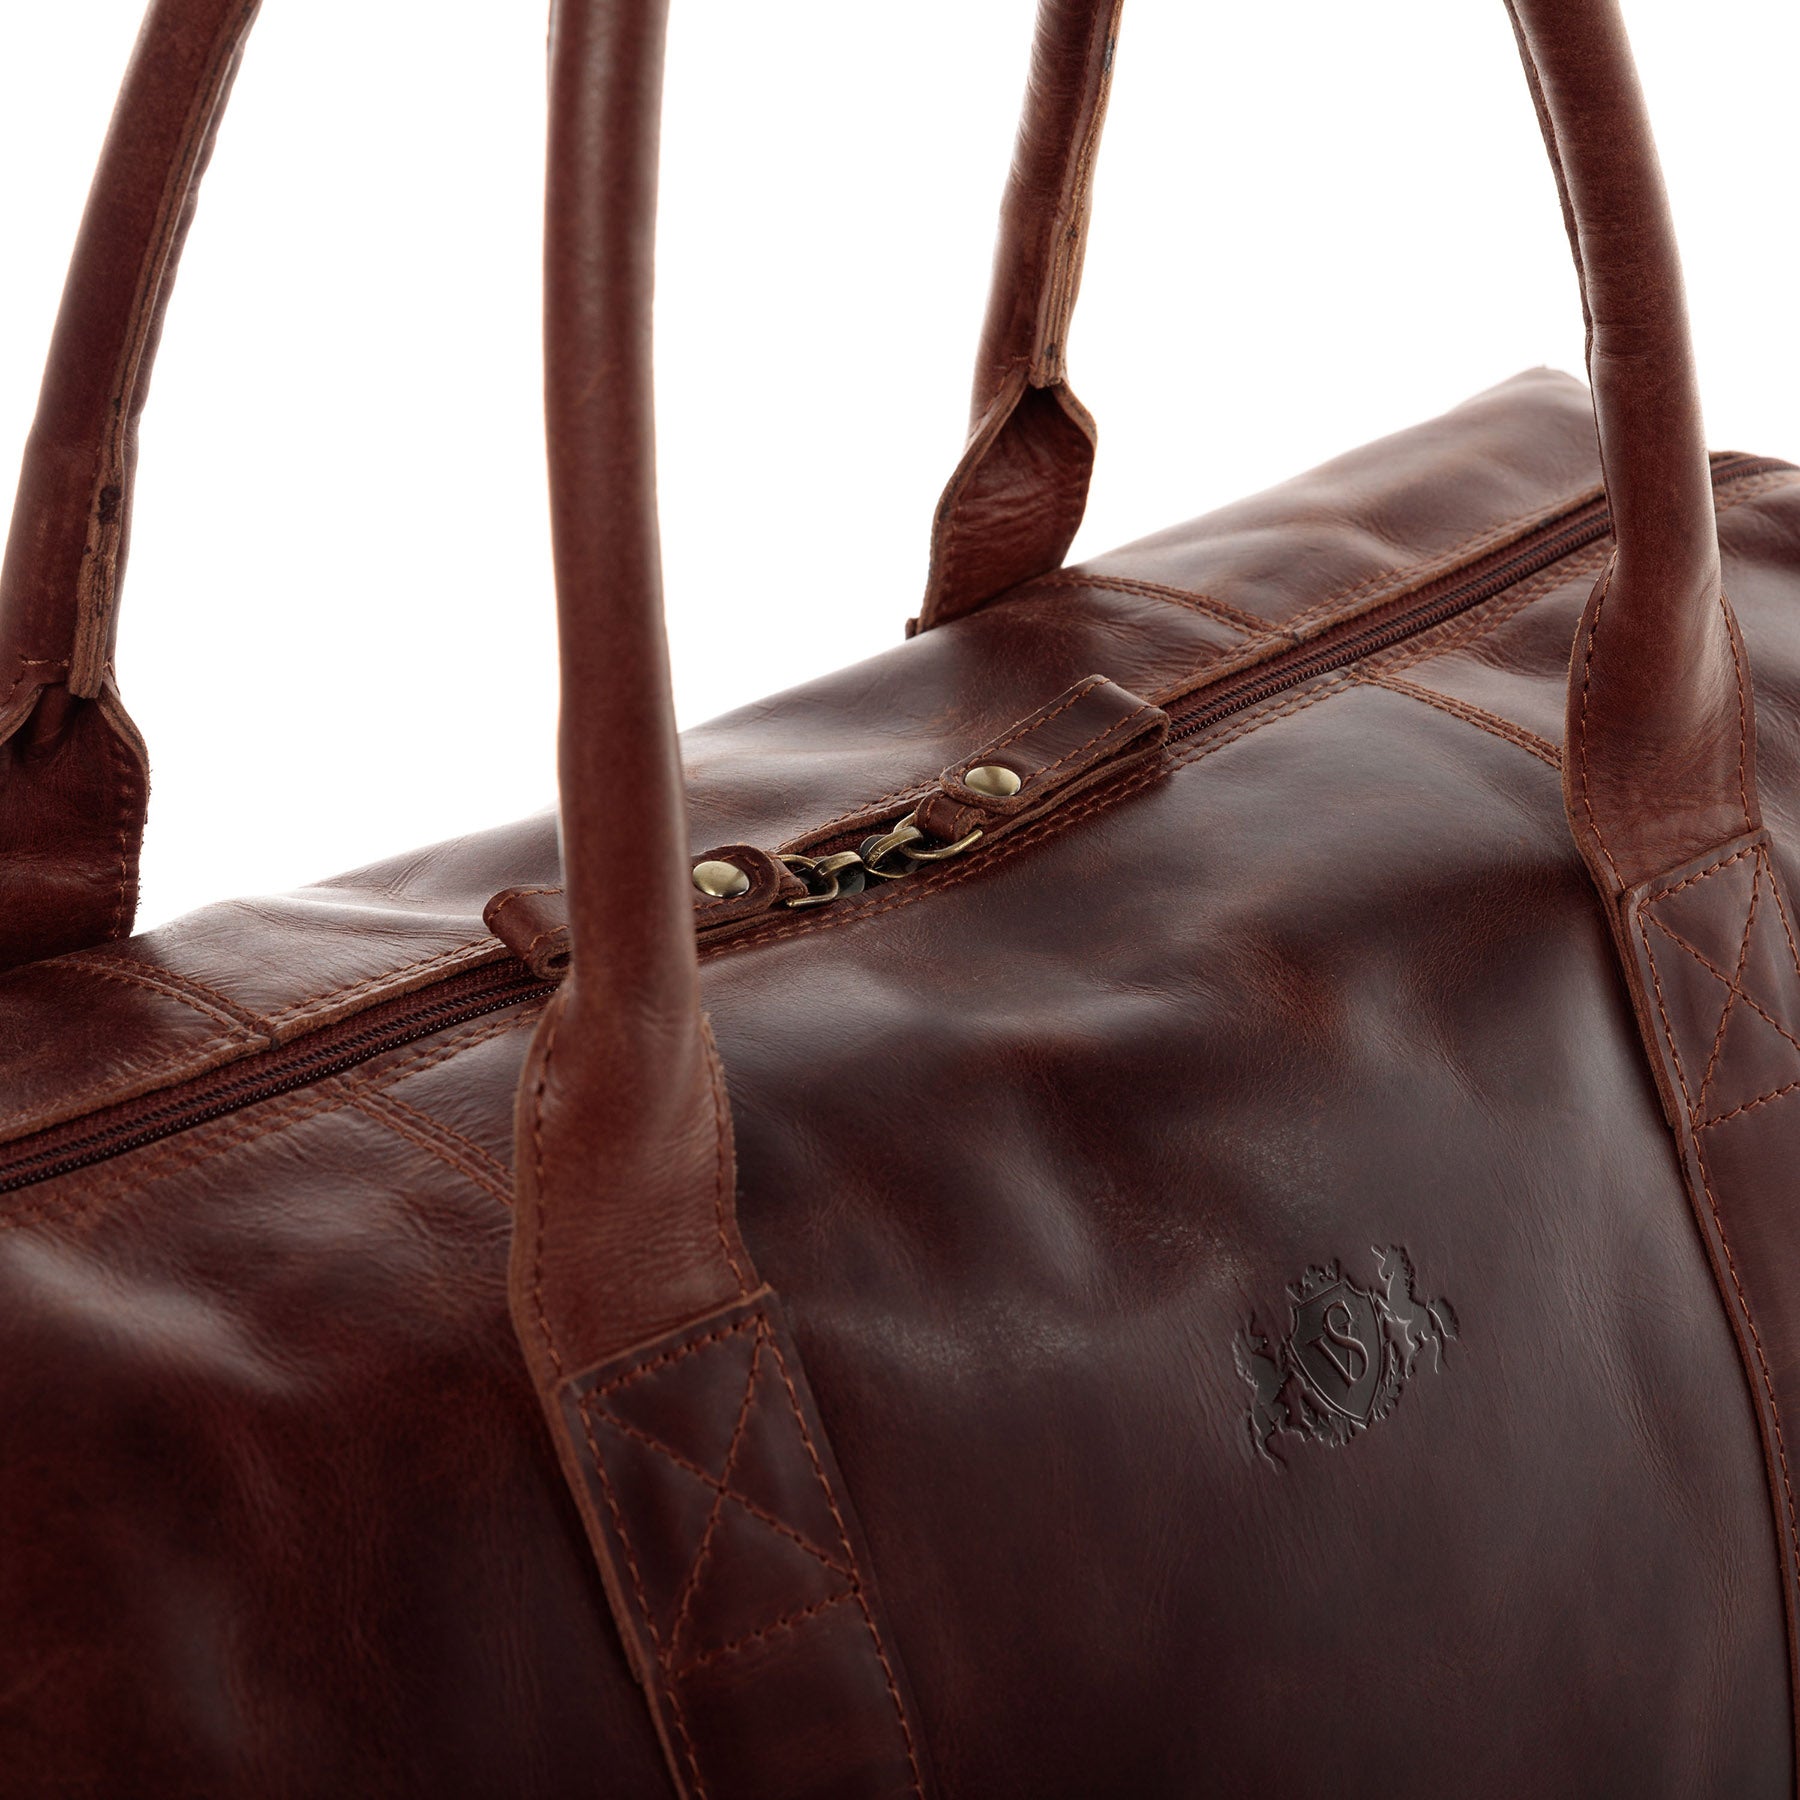 Travel bag with address tag YALE ZIP natural leather brown-cognac